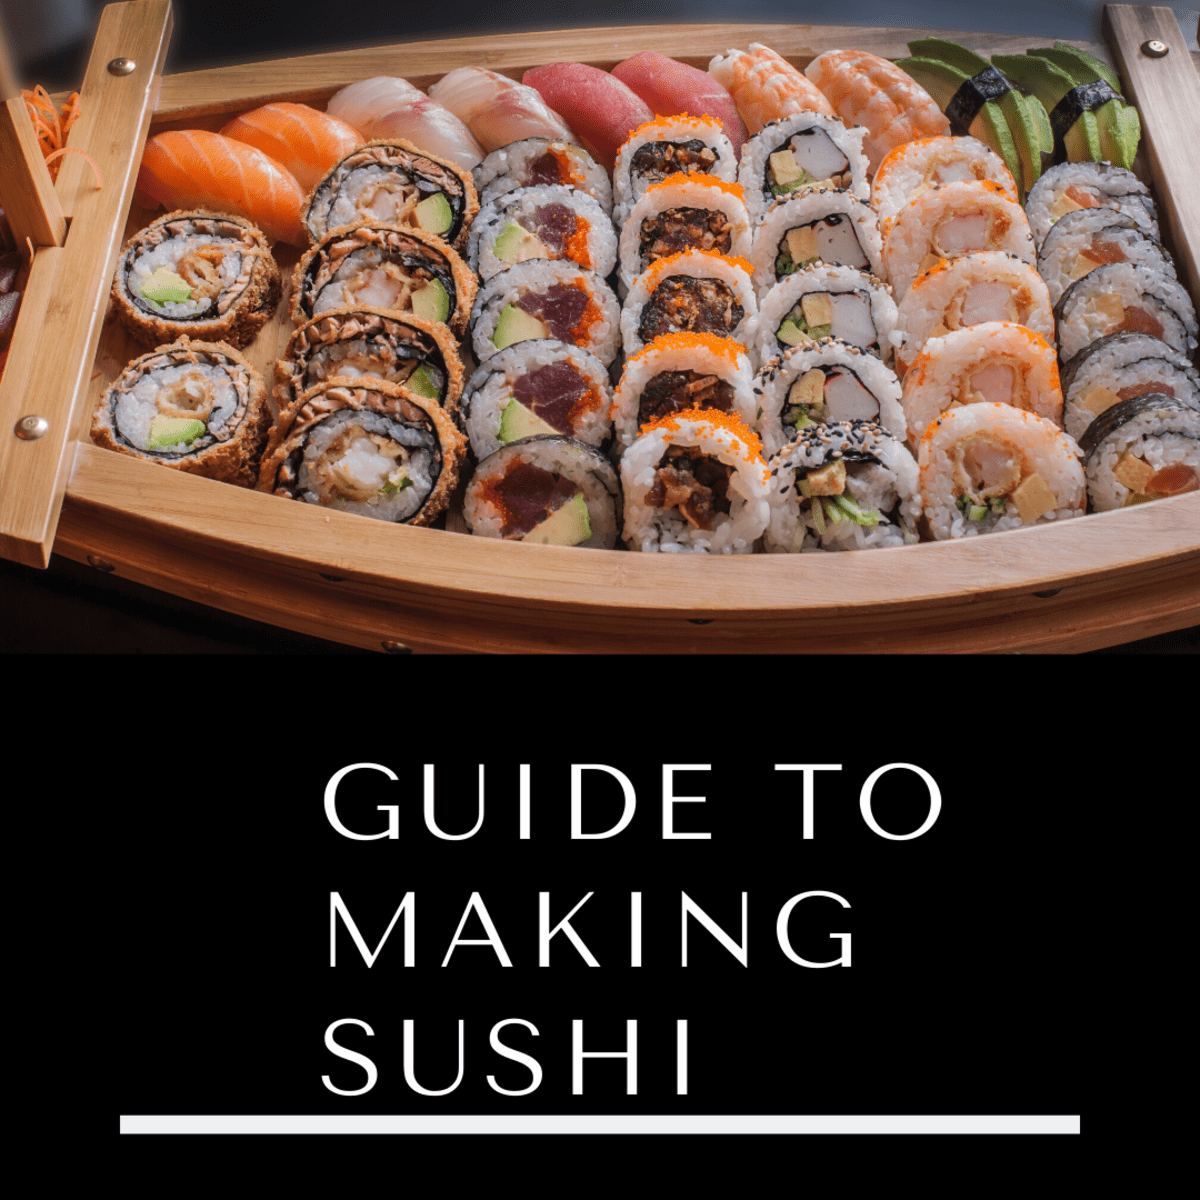 https://images.saymedia-content.com/.image/ar_1:1%2Cc_fill%2Ccs_srgb%2Cq_auto:eco%2Cw_1200/MTczOTYxMDMwNDM4MDM3Mzcx/beginners-guide-to-making-sushi.png